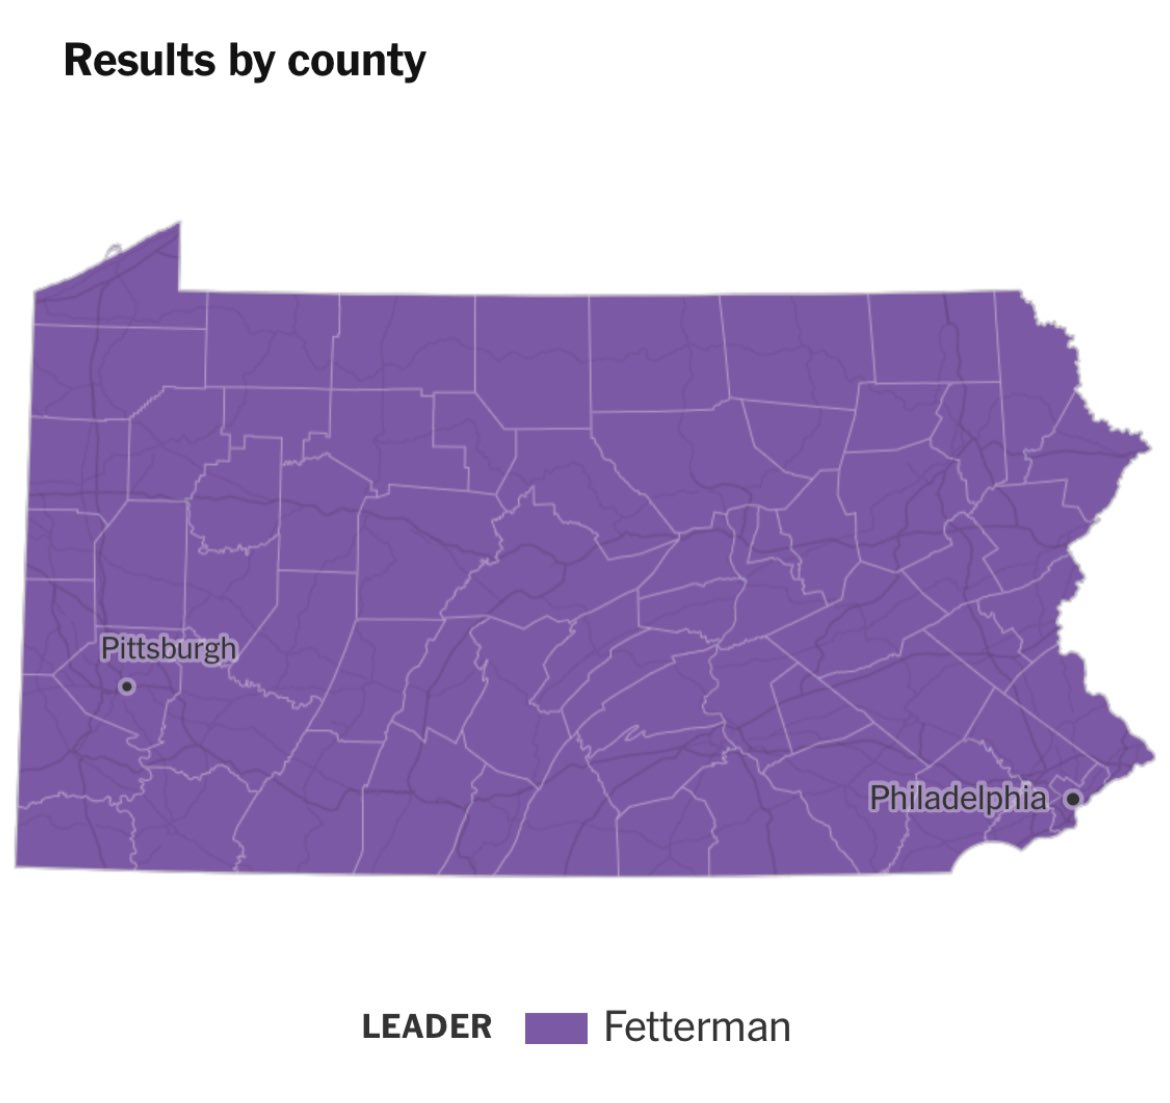 Primary results map: Fetterman leading in 67/67 counties